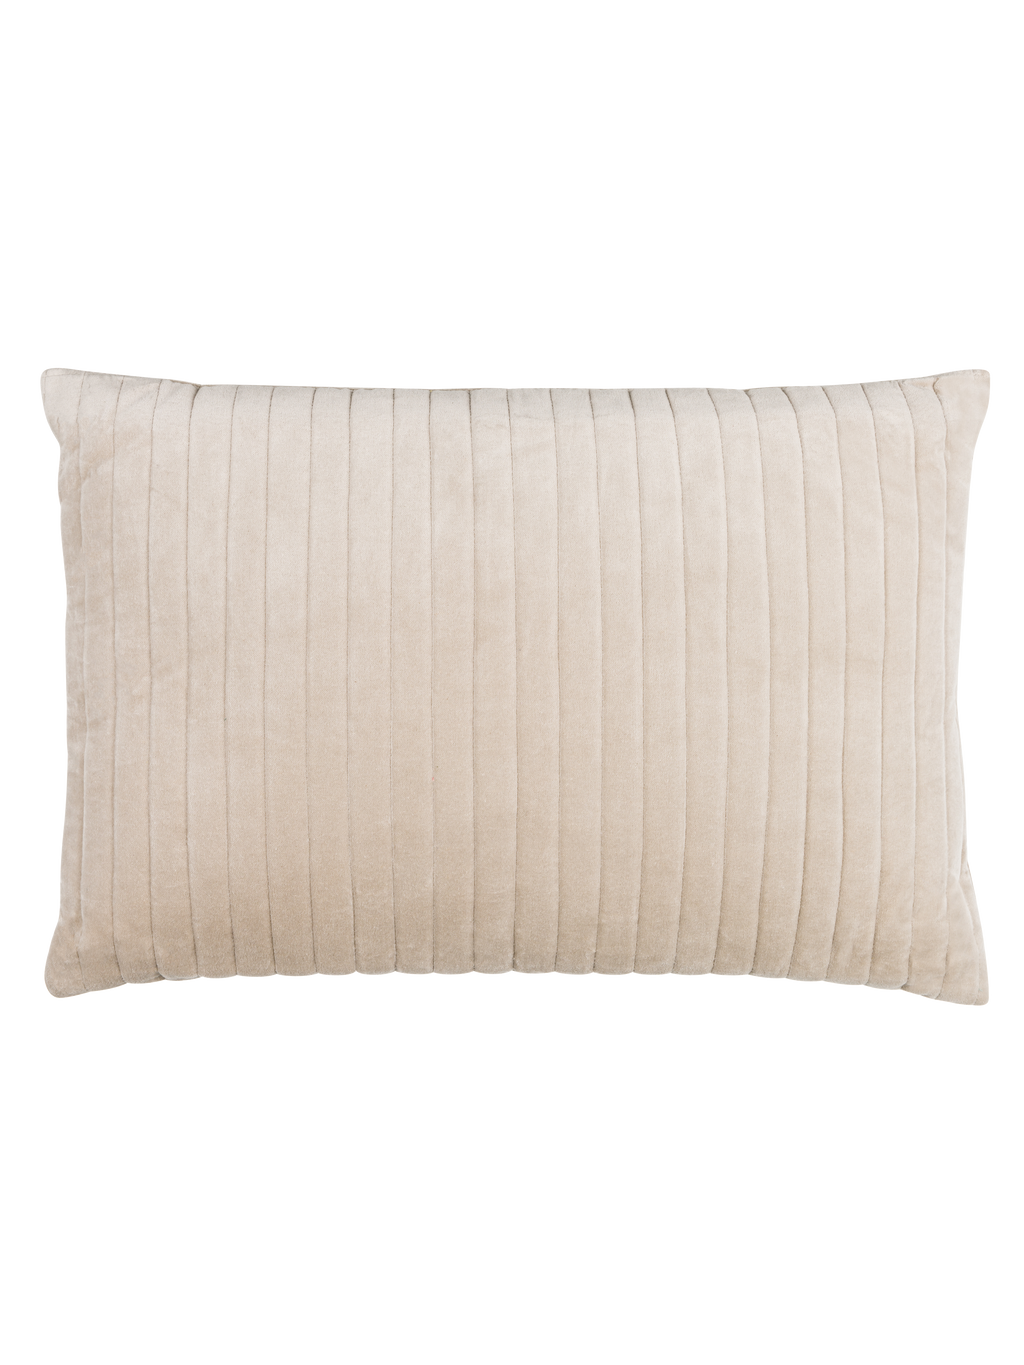 Velvet Cushion with Striped Stitching in Oyster